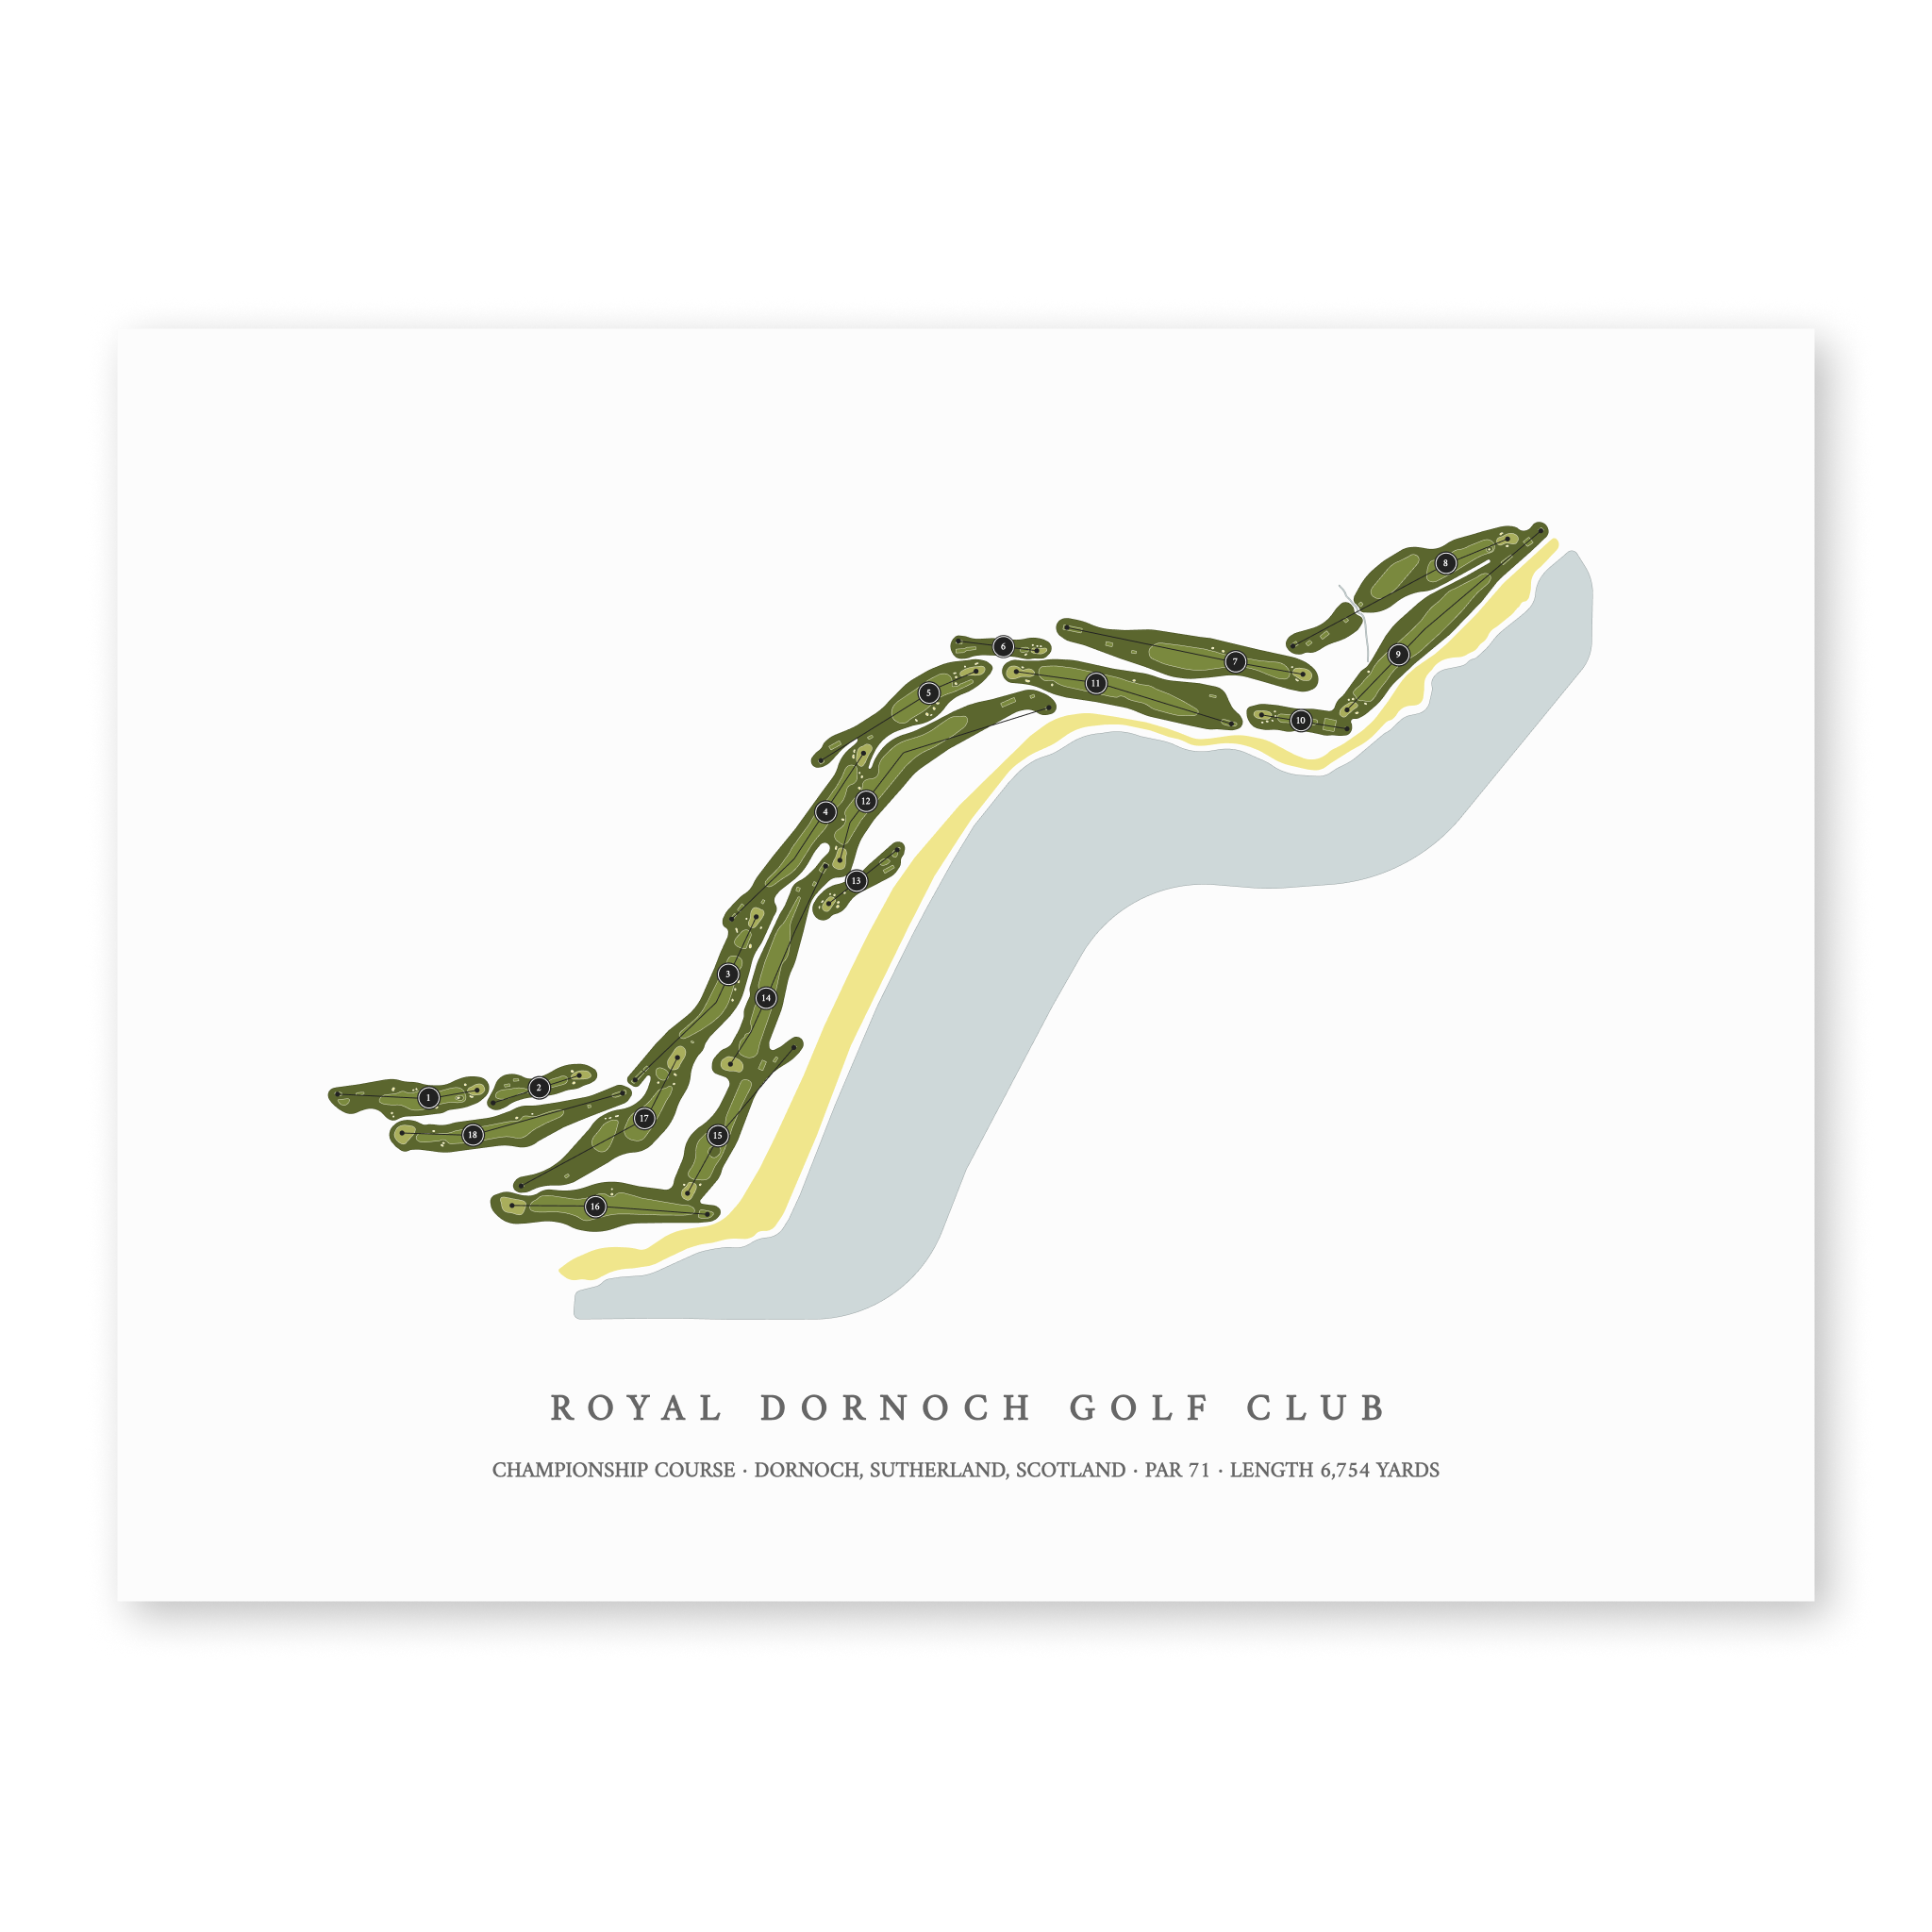 Royal Dornoch Golf Club - Championship Course | Golf Course Map | Unframed With Hole Numbers #hole numbers_yes